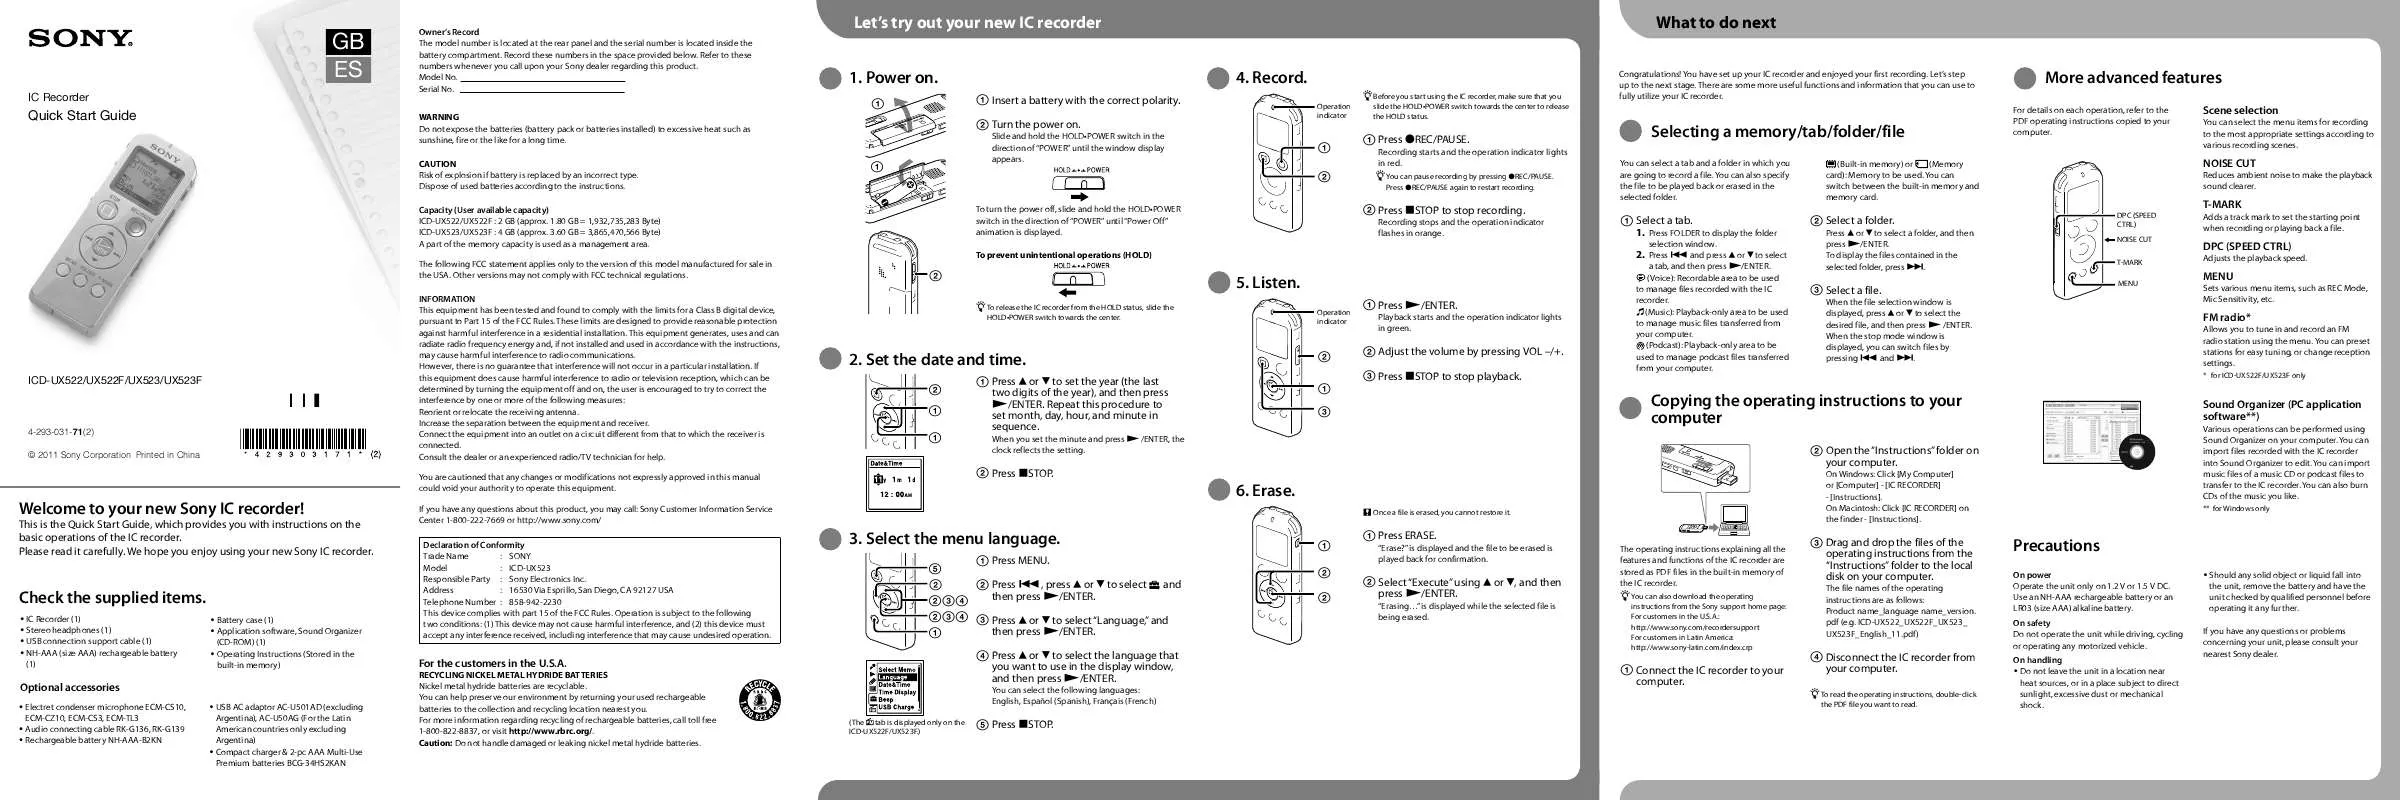 Mode d'emploi SONY ICD-UX523/G